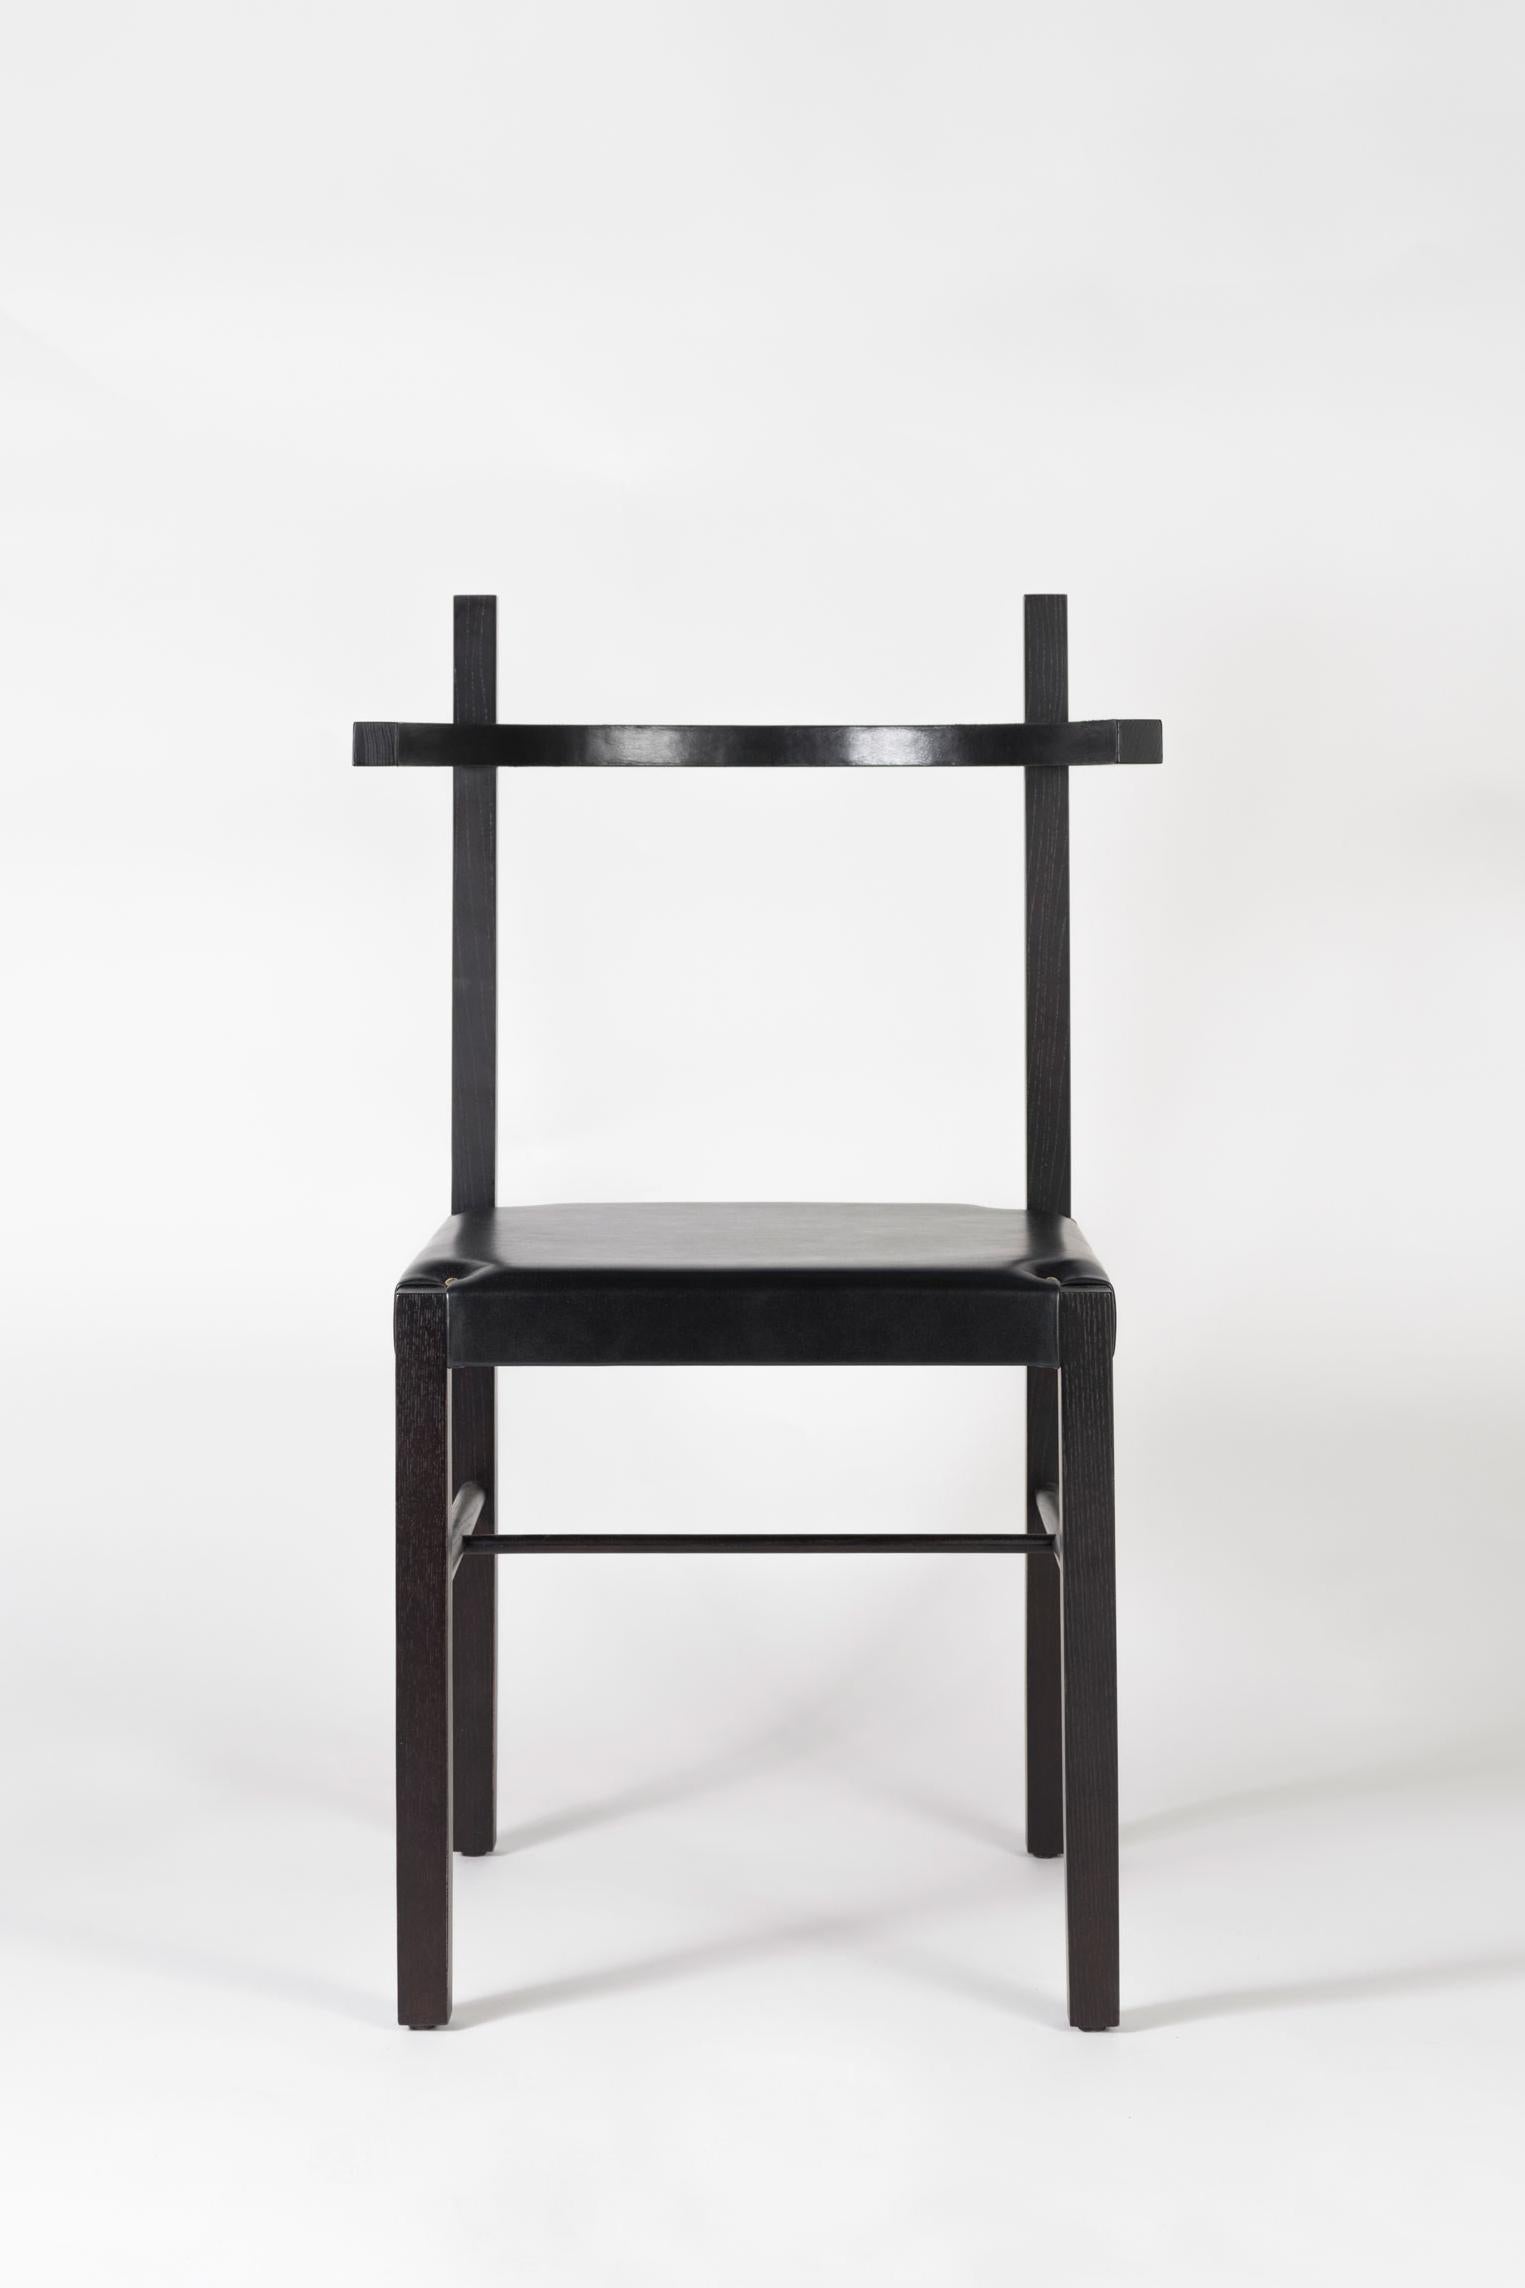 The Soren chair celebrates a minimal aesthetic as well as the natural beauty of its materials, wood and leather. The chair’s back rest is a bold circular arch that is lined with a strip of black leather on its inner face, and fits seamlessly into